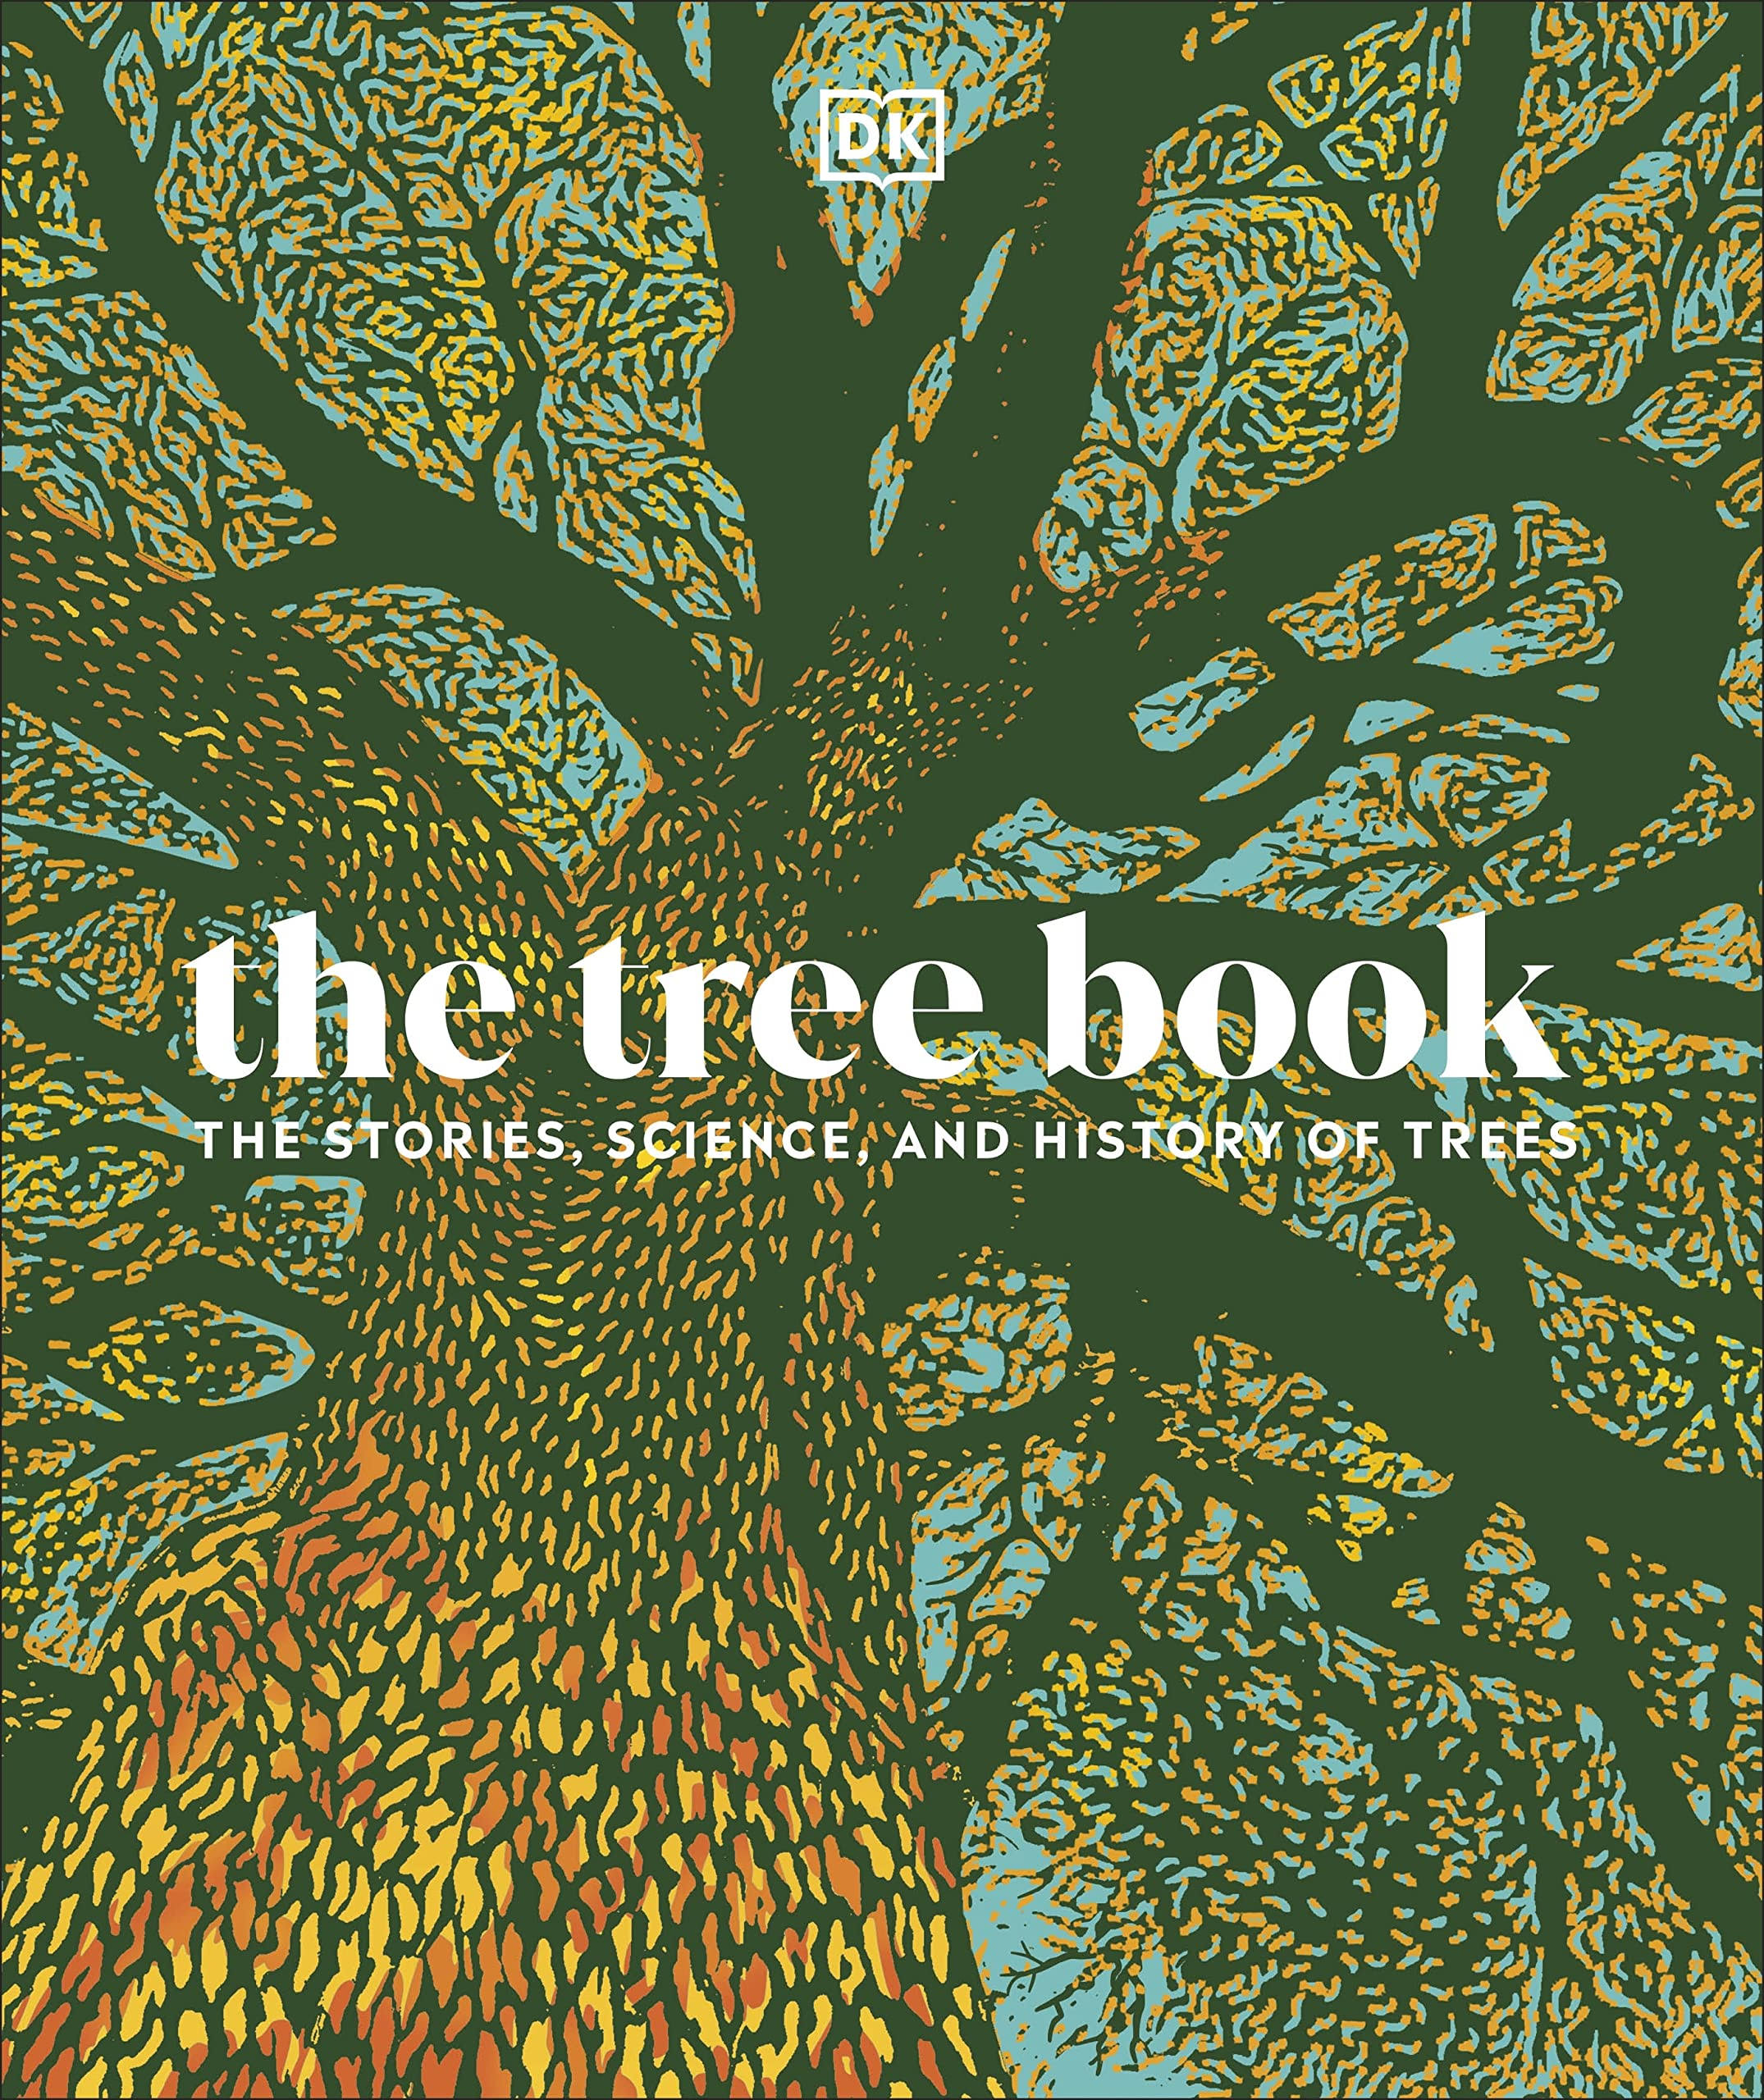 The Tree Book: The Stories, Science, and History of Trees [Book]